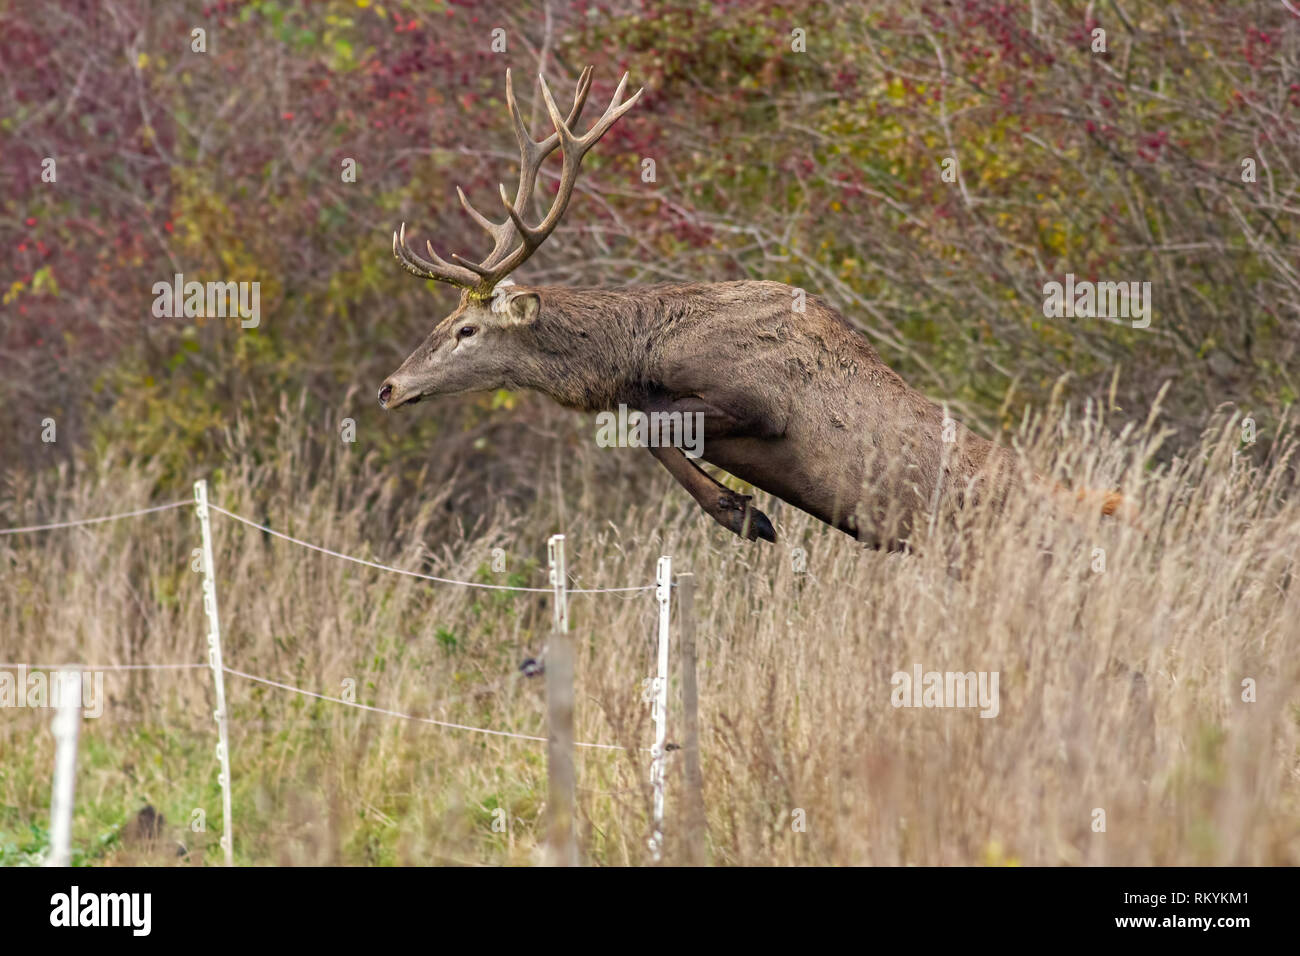 Red deer, cervus elaphus, stag jumping over fence captured mid air. Concept of wild animal migrating to agricultural fields. Concept of a mammal overc Stock Photo